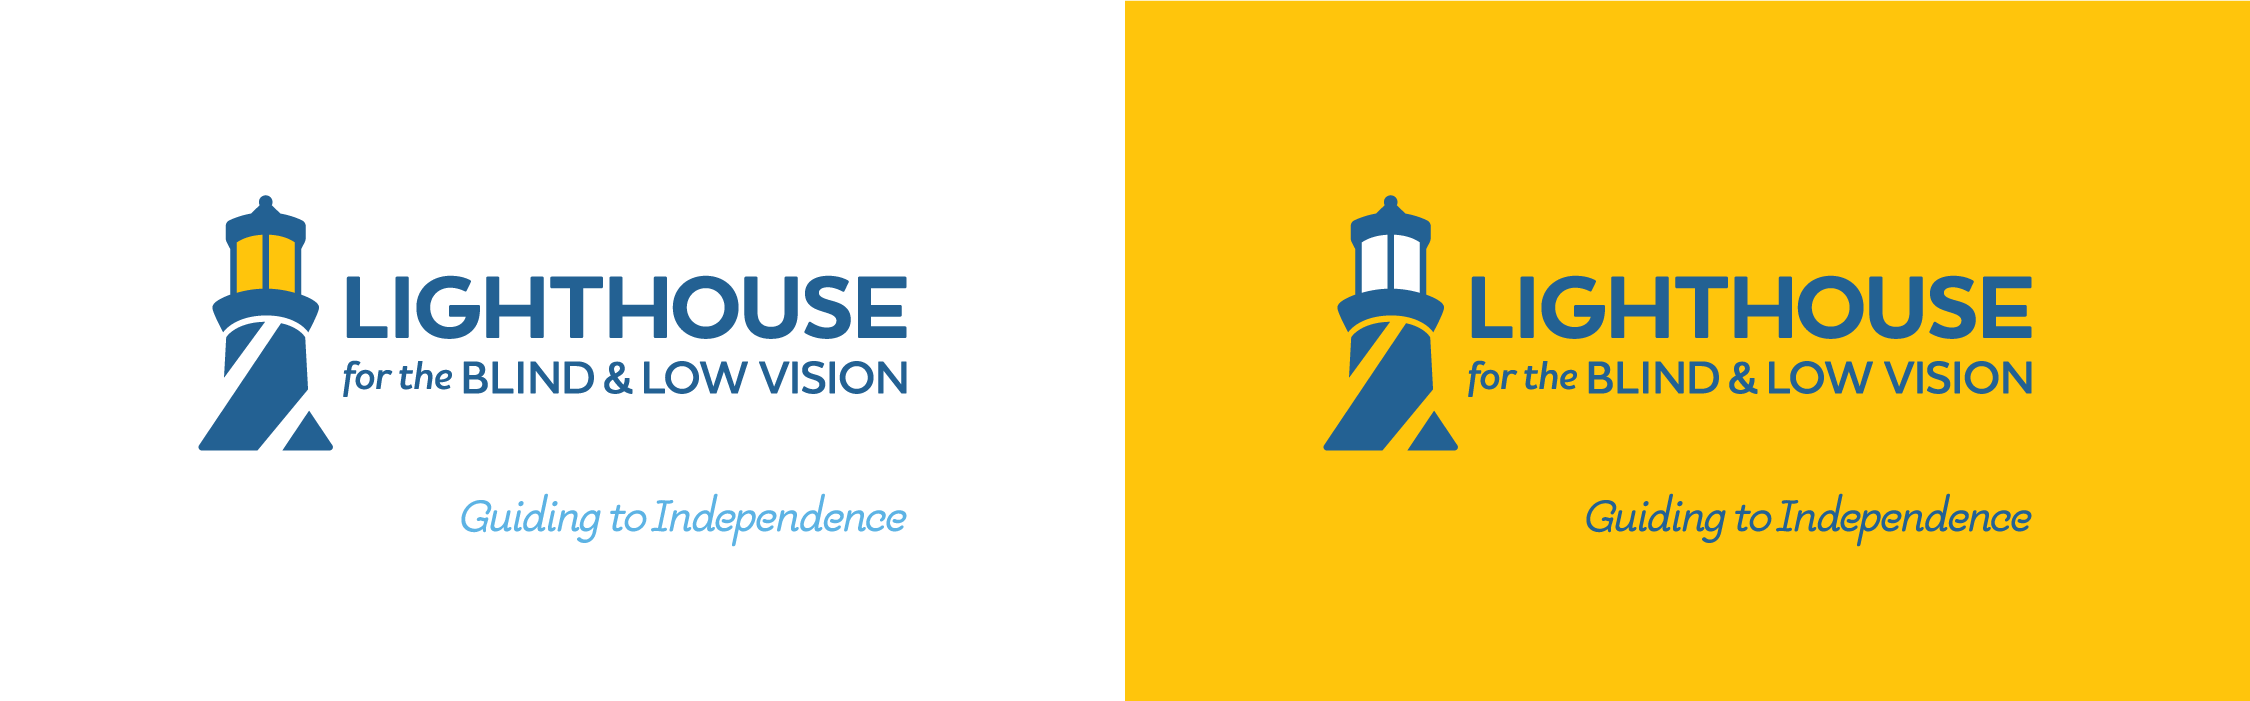 Lighthouse for the Blind & Low Vision New Logo Brand Refresh